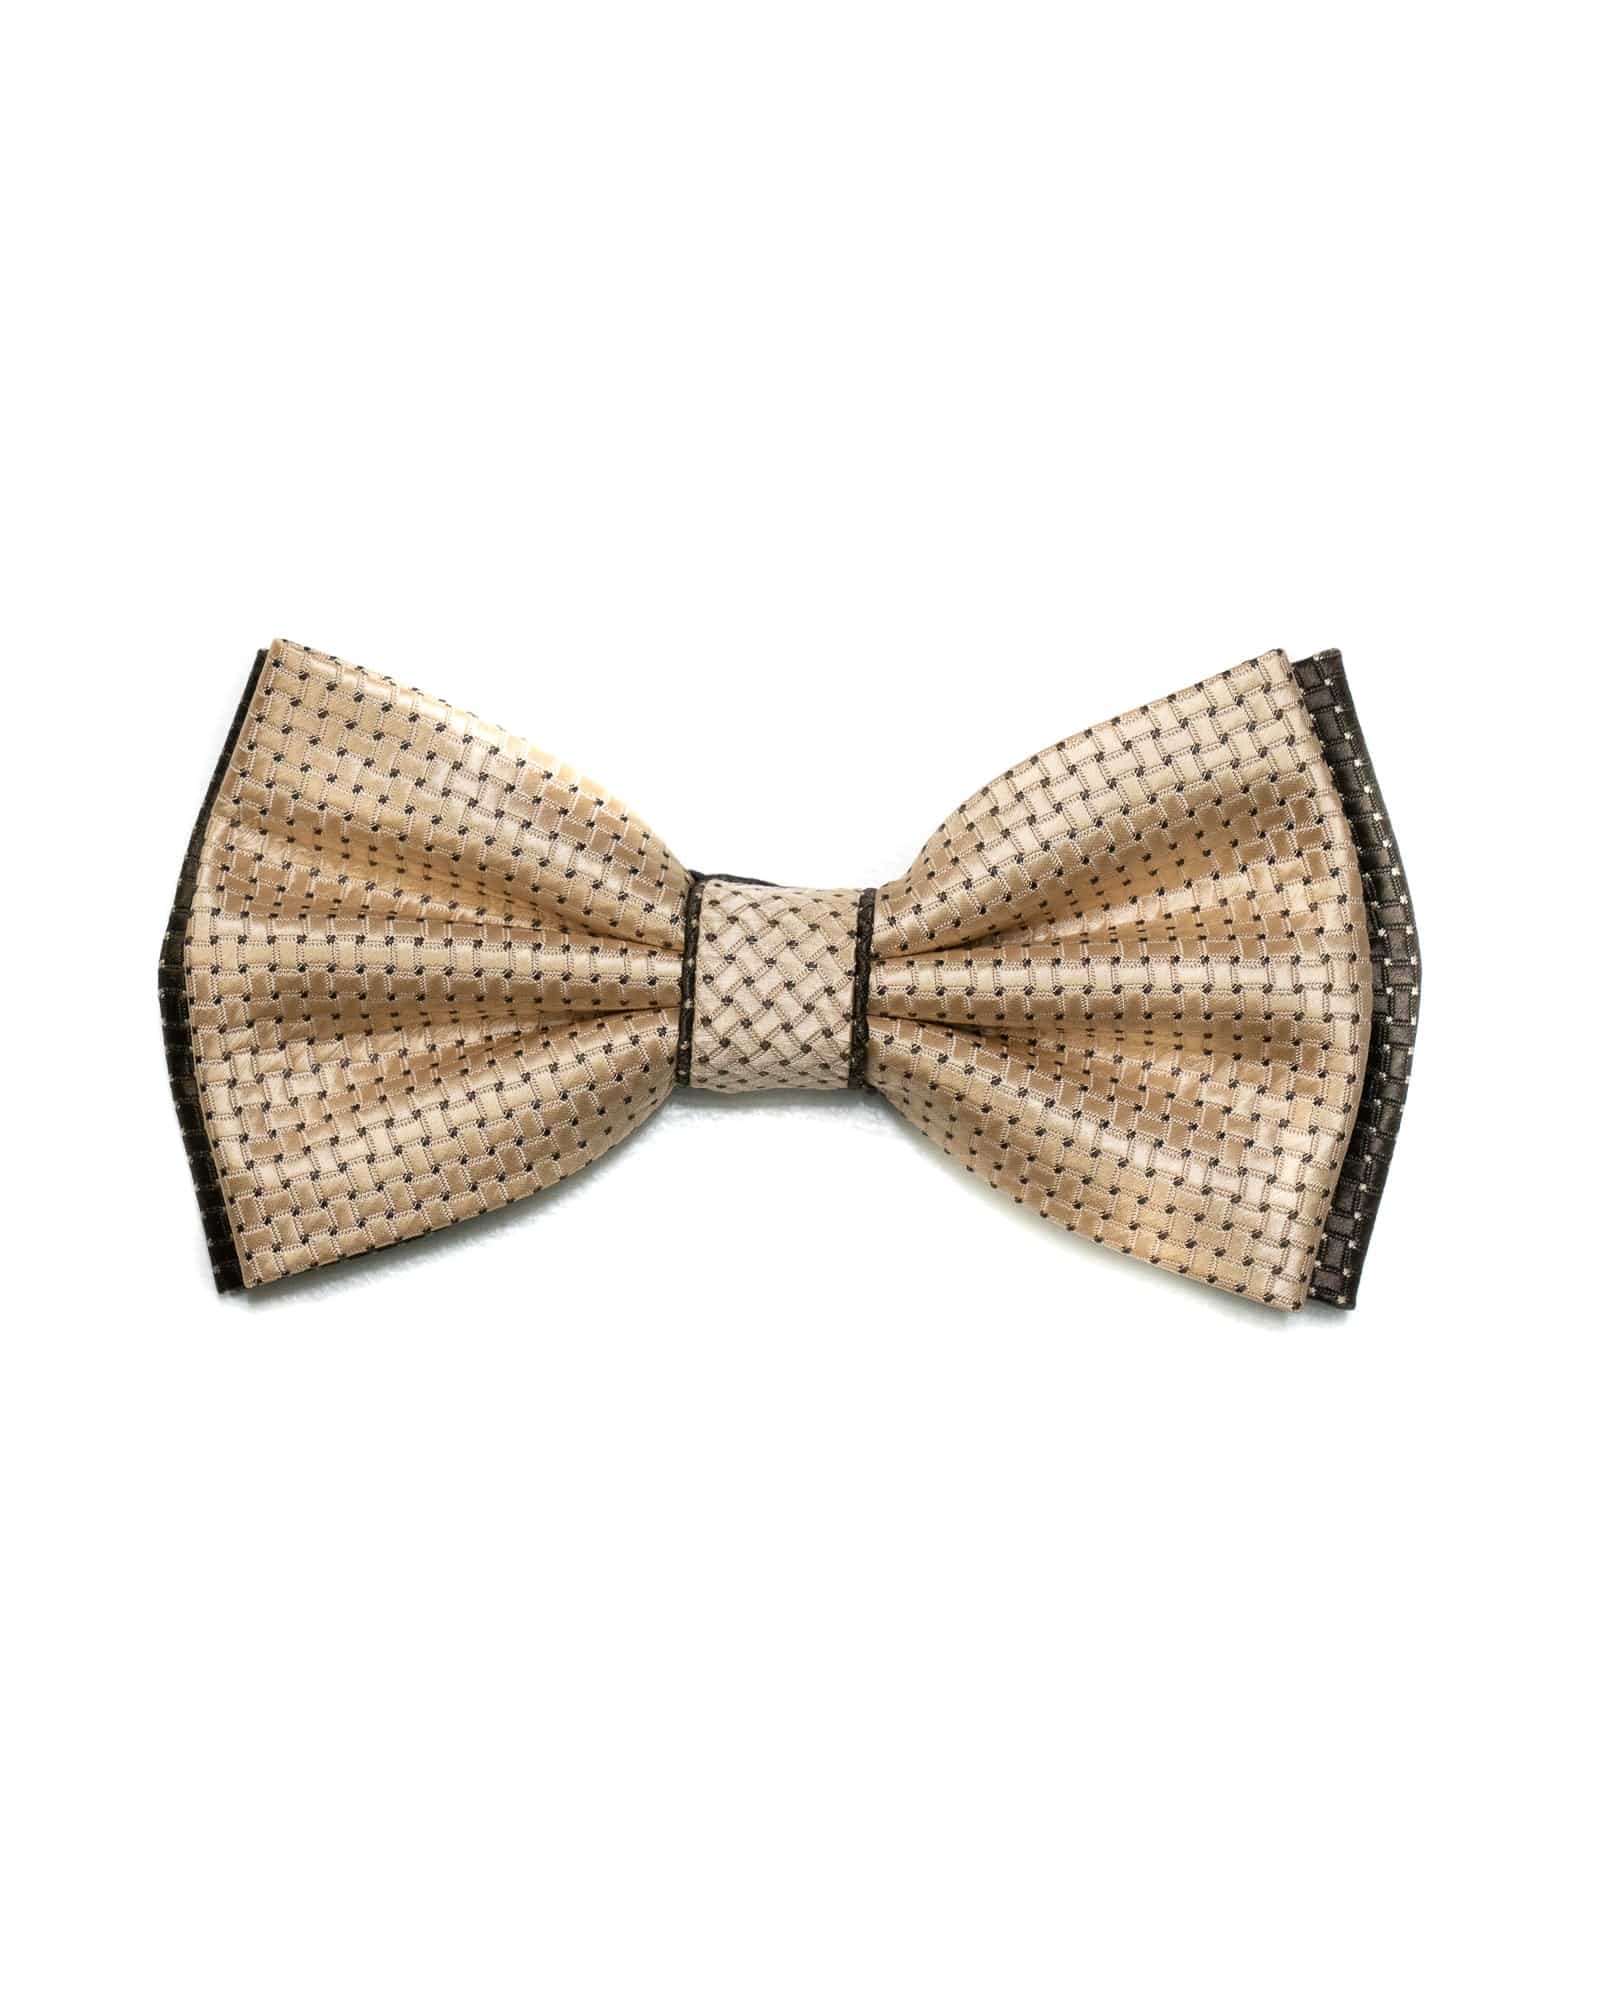 Bow Tie In Two Tone With Two Pocket Squares In Tan & Brown Neat - Rainwater's Men's Clothing and Tuxedo Rental